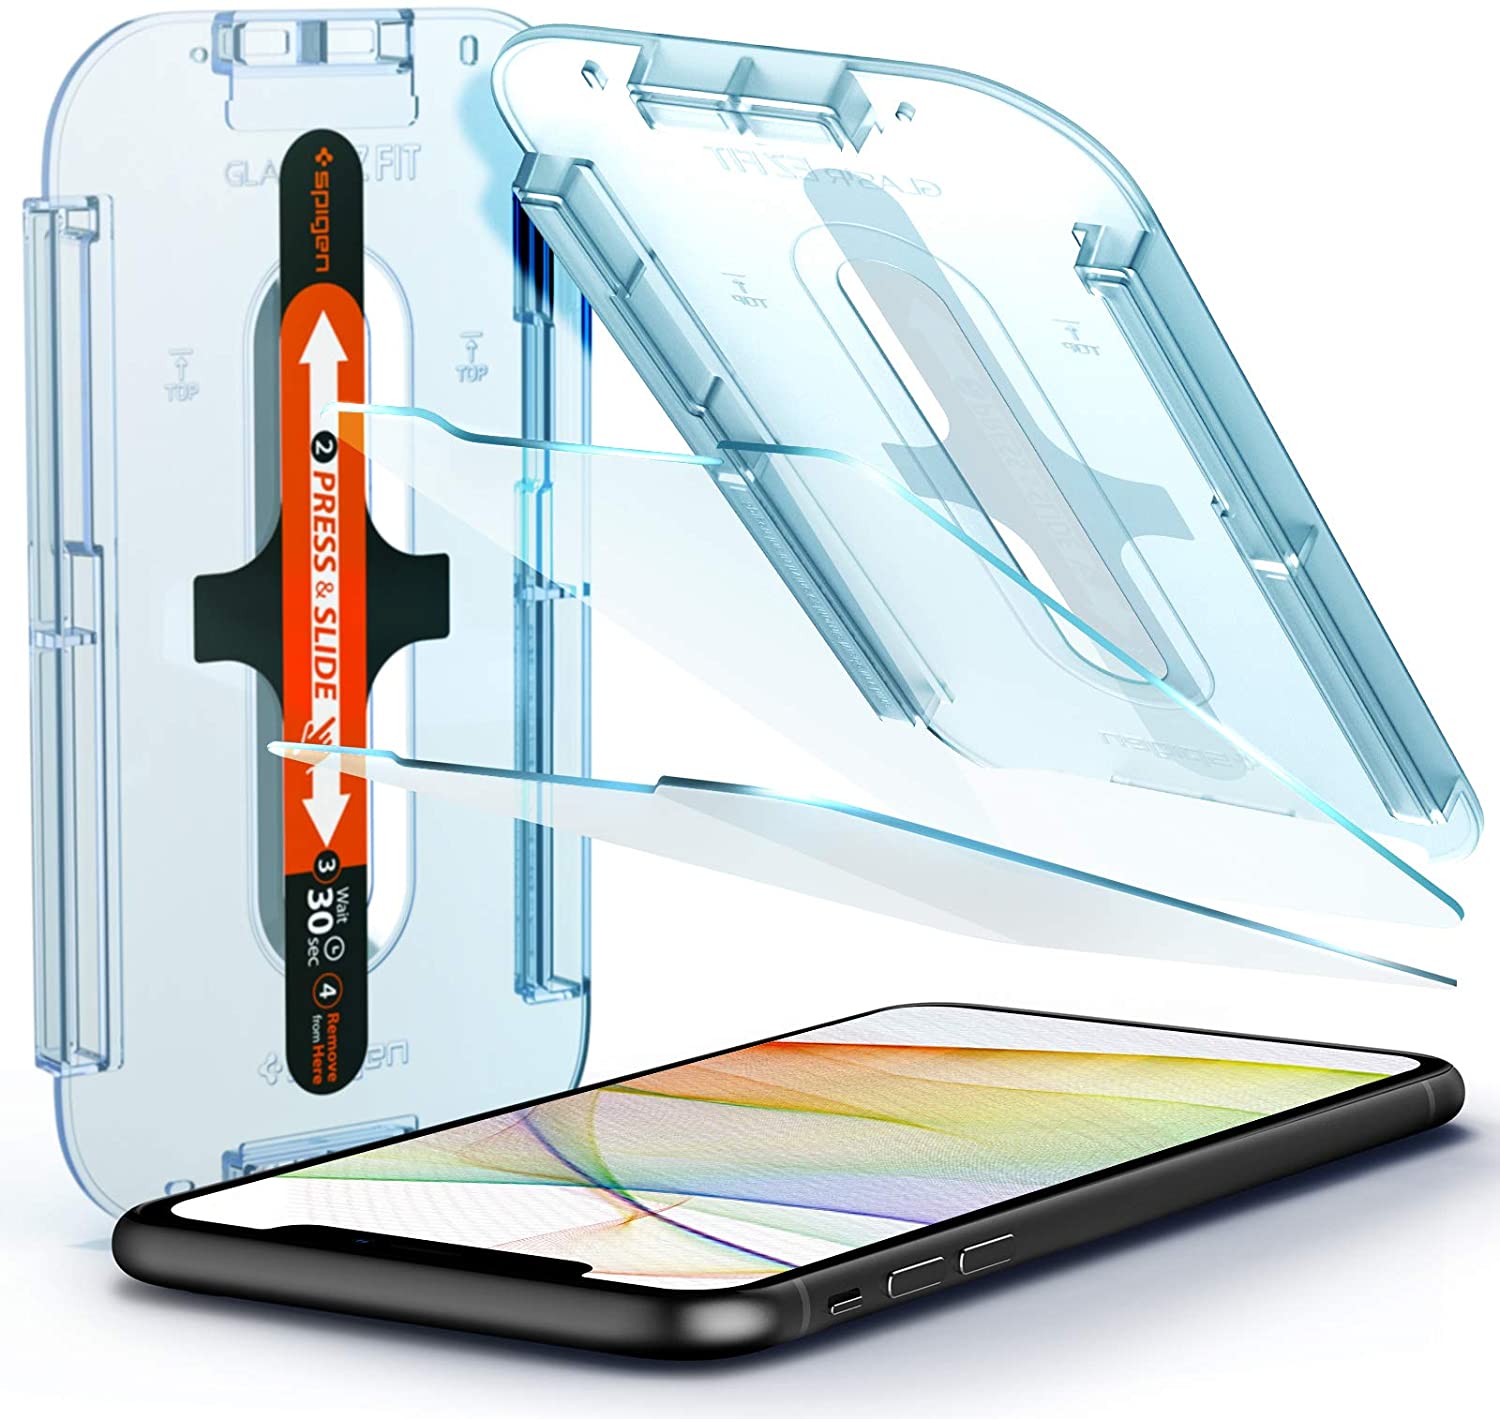 Spigen Tempered Glass Screen Protector [Glas.tR EZ Fit] designed for iPhone 11 / iPhone XR [6.1 inch] [Case Friendly] - 2 Pack - e4cents